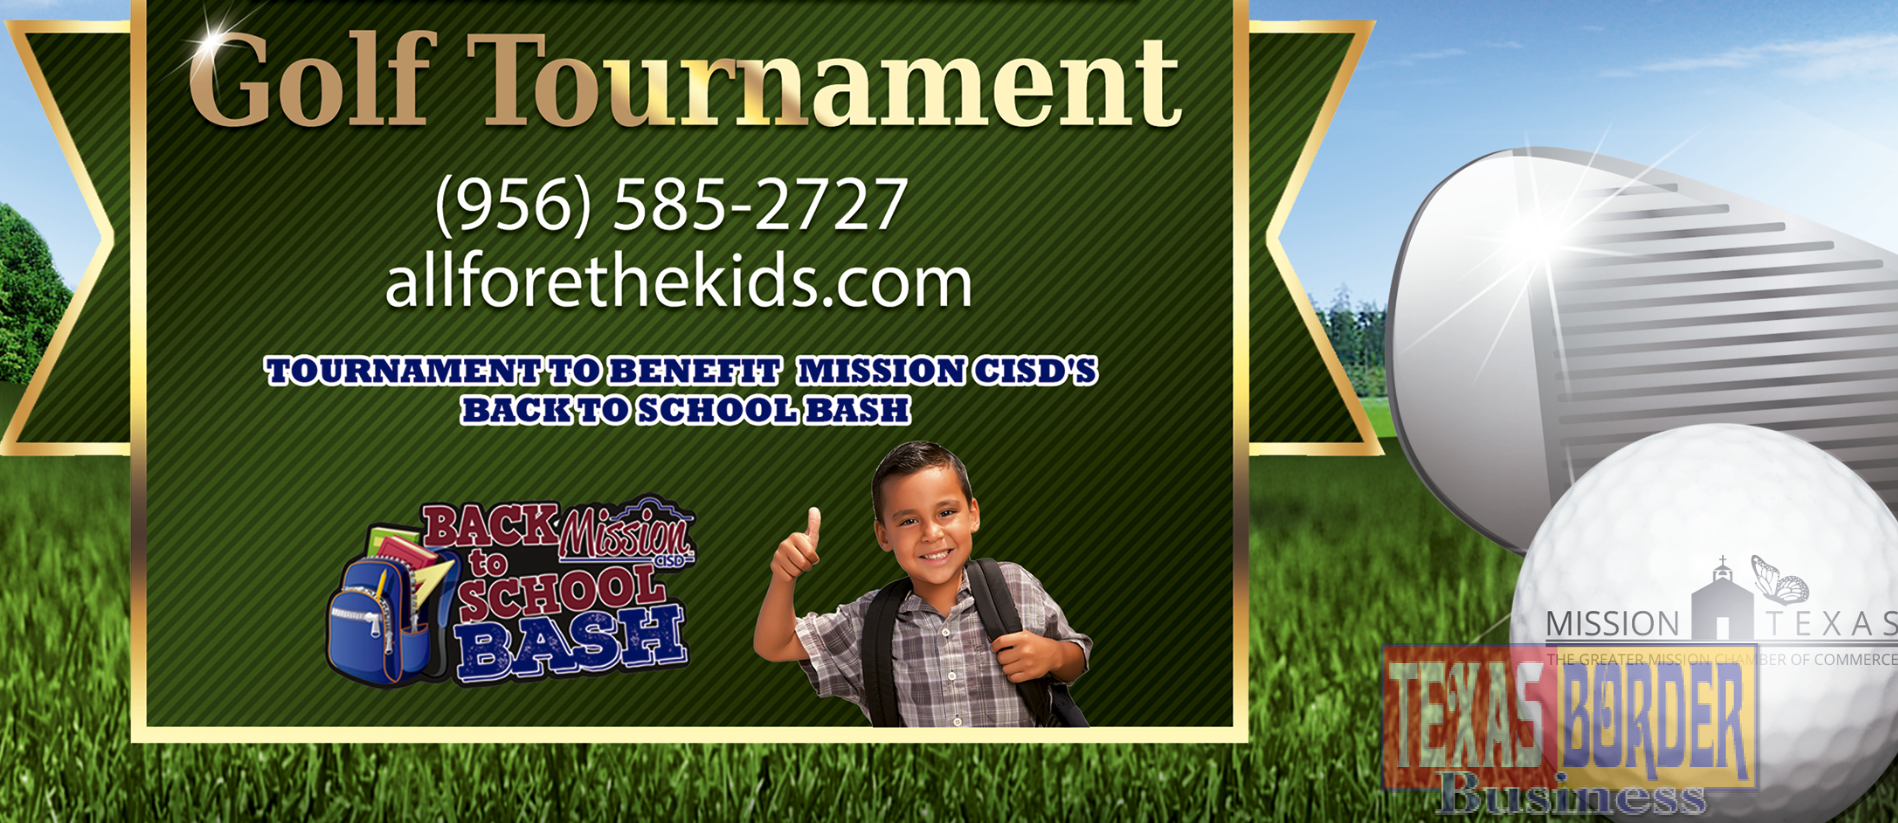 What: All “Fore” The Kids Golf Tournament When: Friday, April 29, 2016, Registration at 6:00 a.m. Shotgun at 7:30 a.m. Where: Club at Cimarron, 1200 S. Shary Rd, Mission, TX Event Details Format is an 18 hole, three (3) player team Florida Scramble. For more information, call (956)585-2727 or visit www.allforethekids.com